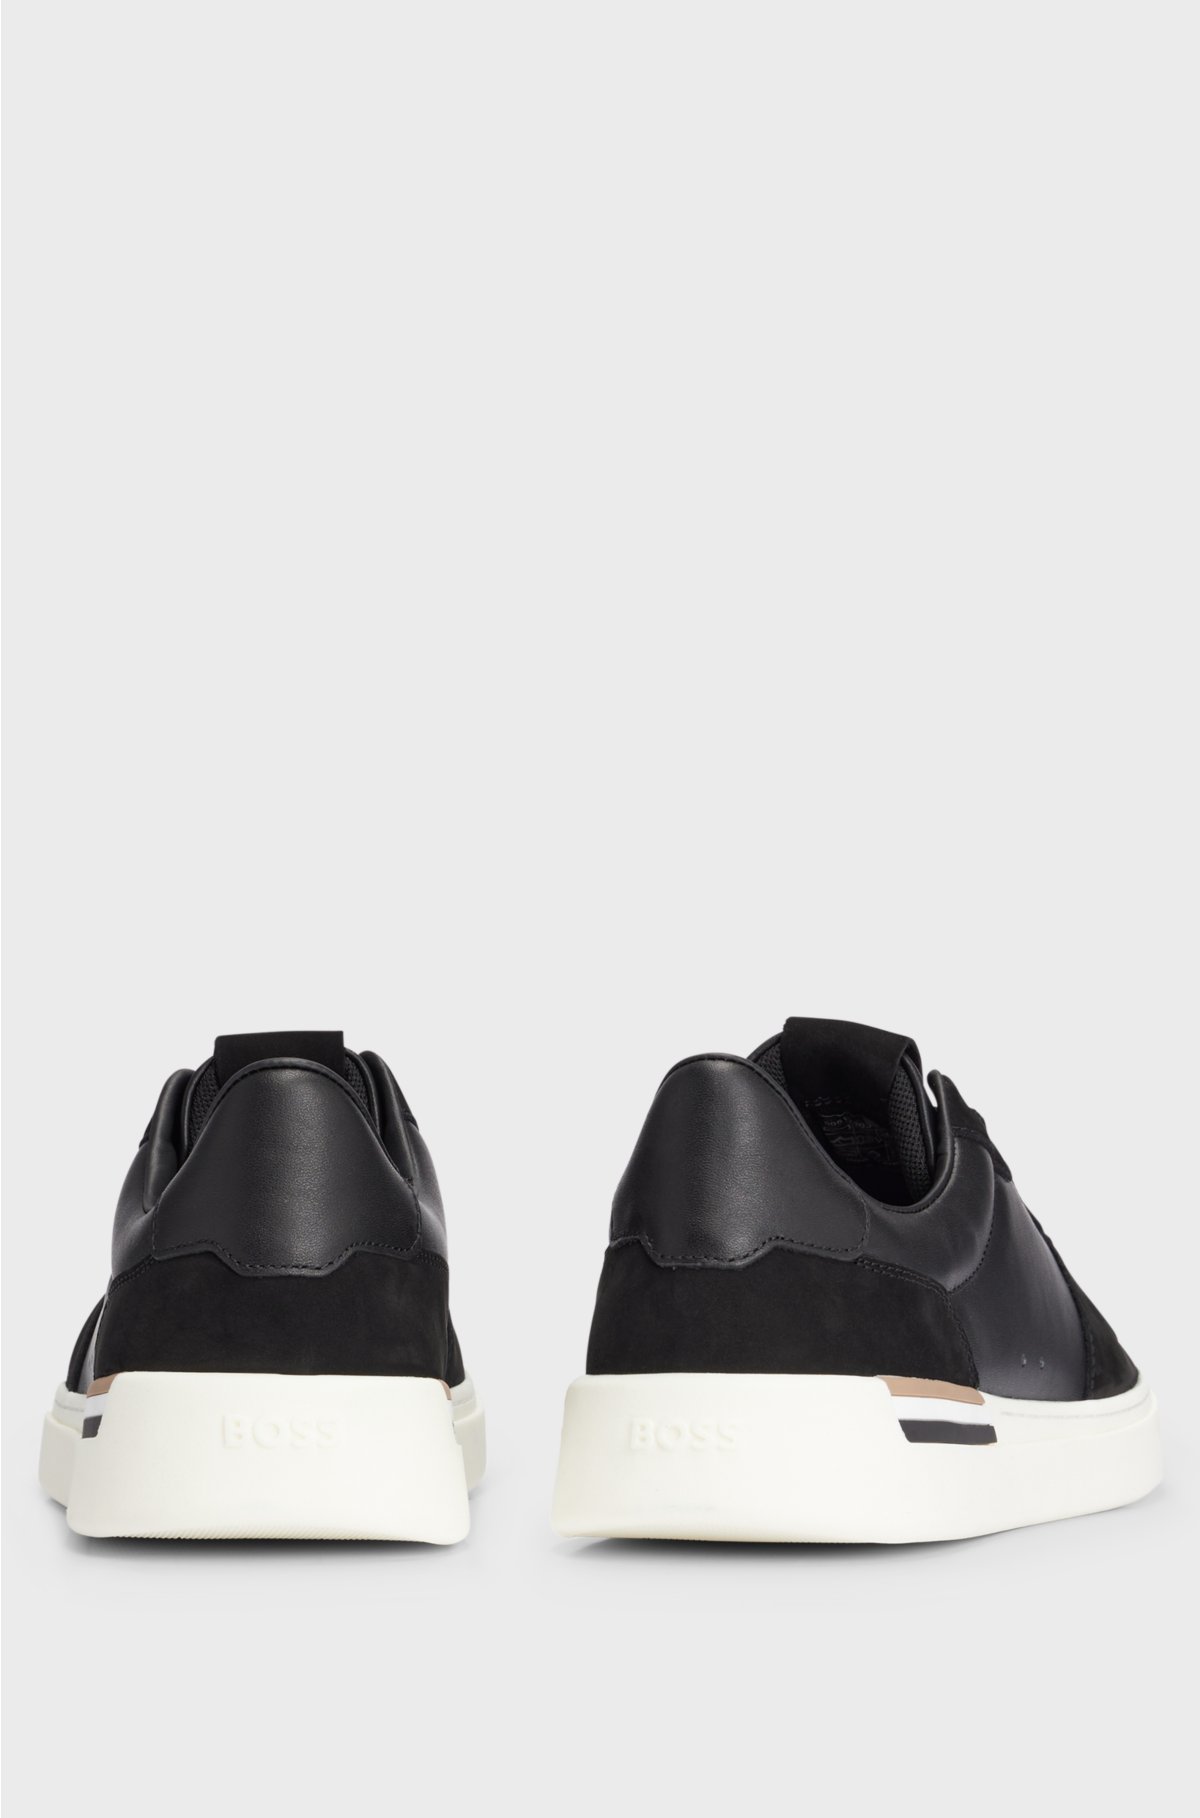 Cupsole lace-up trainers in leather and suede, Black